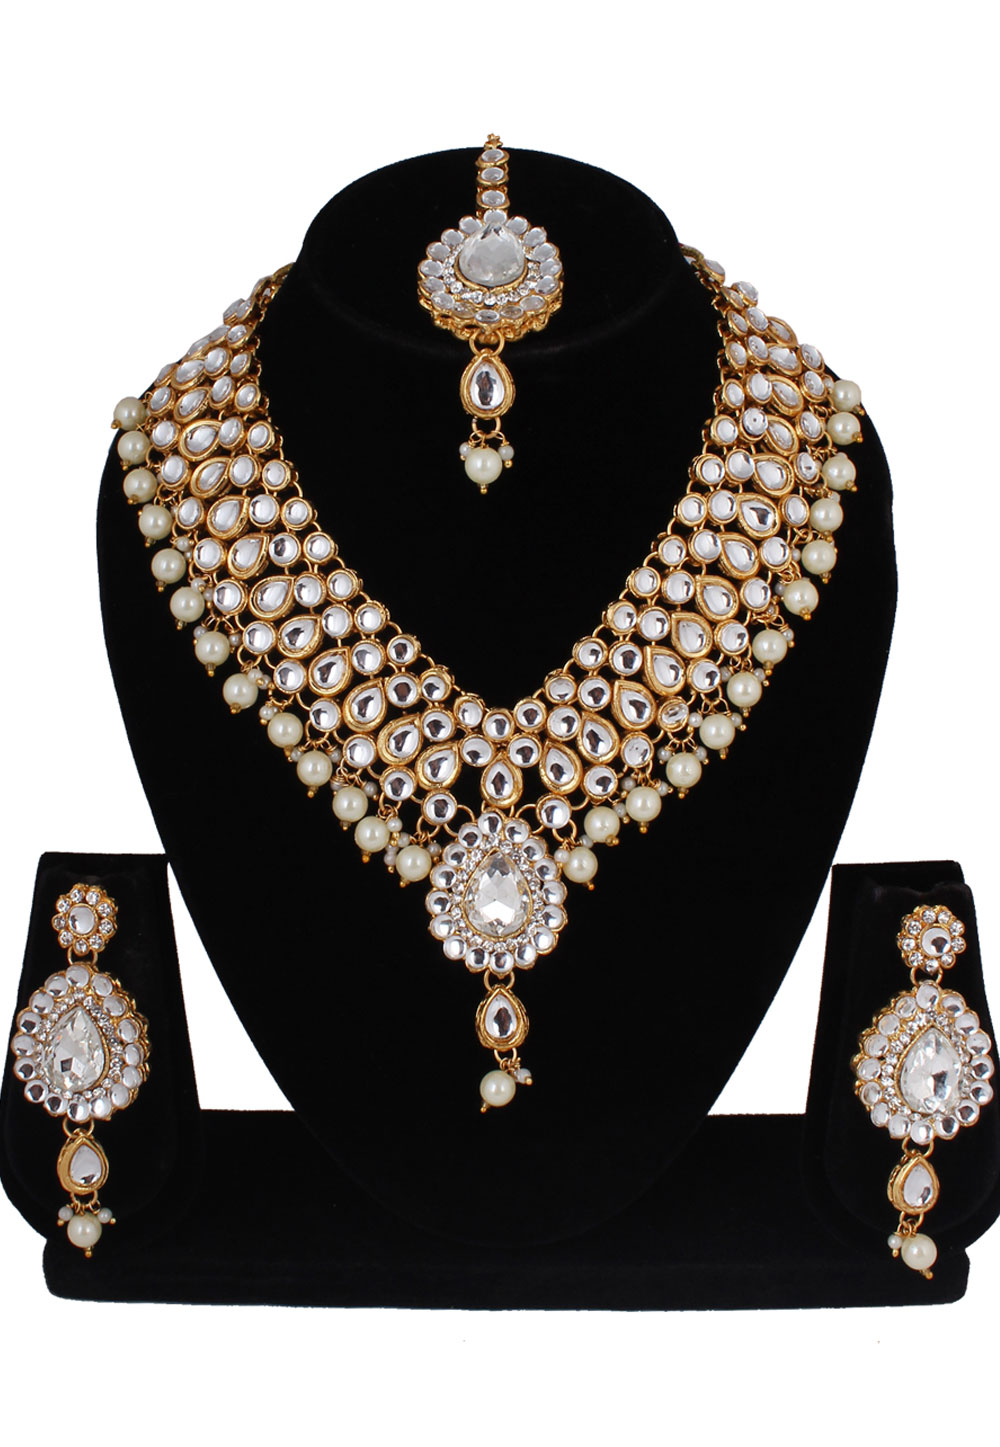 Off White Alloy Necklace Set With Earrings and Maang Tikka 257379